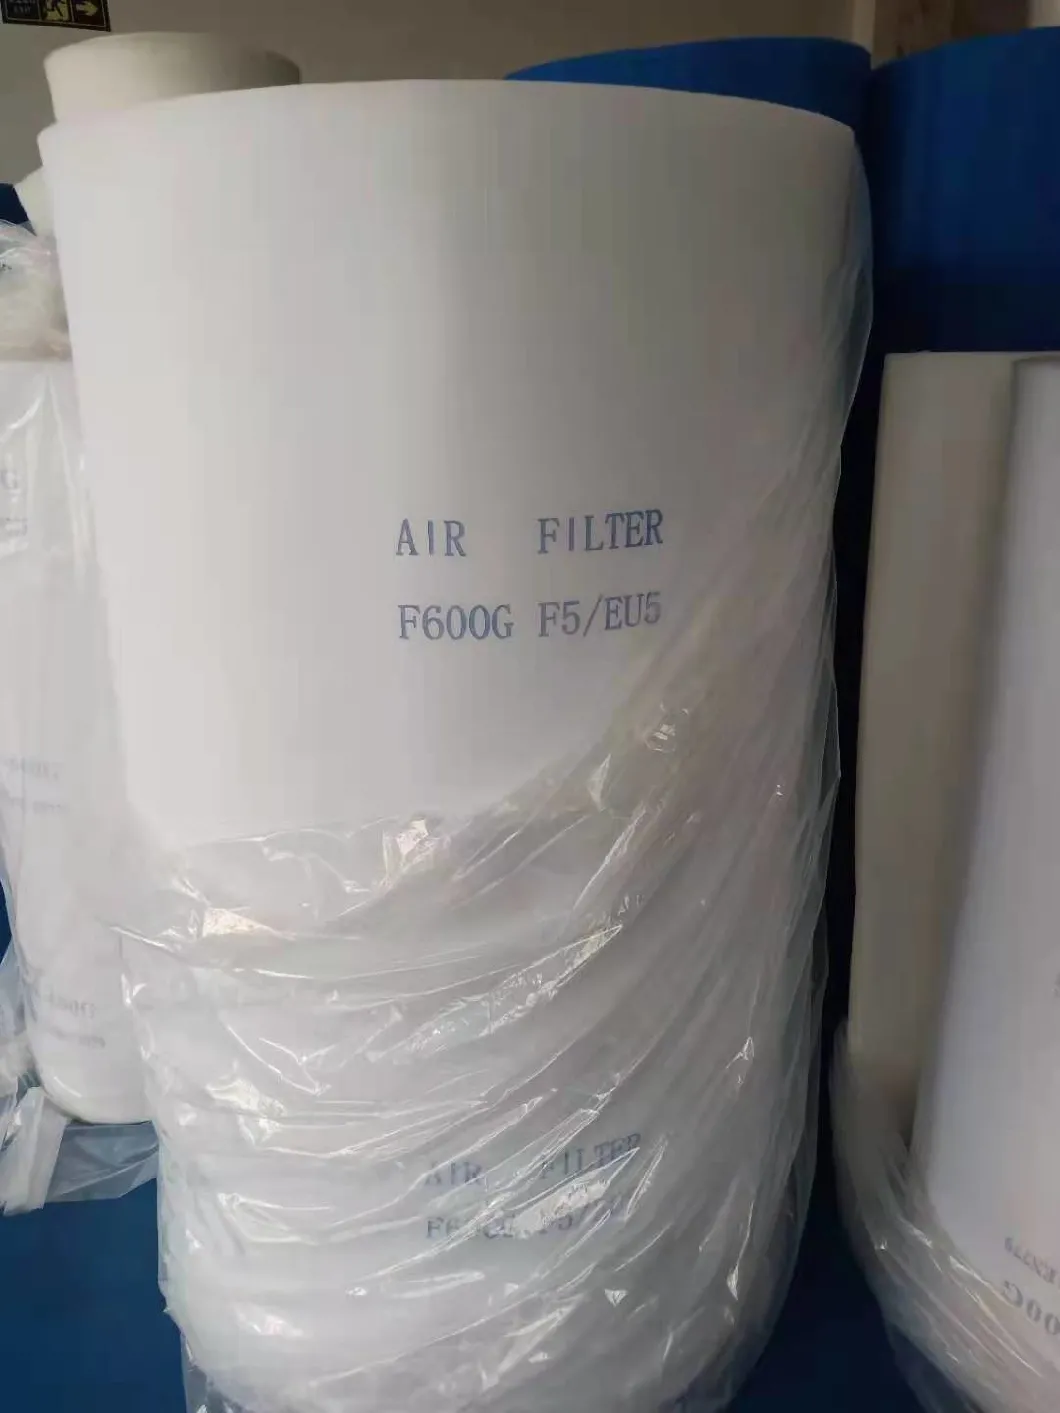 Filtrair Speritex Vefim Viledon Volz Replacement Ceiling Filter Diffusion Media Roof Filter 600g 560g Spray Booth Filter